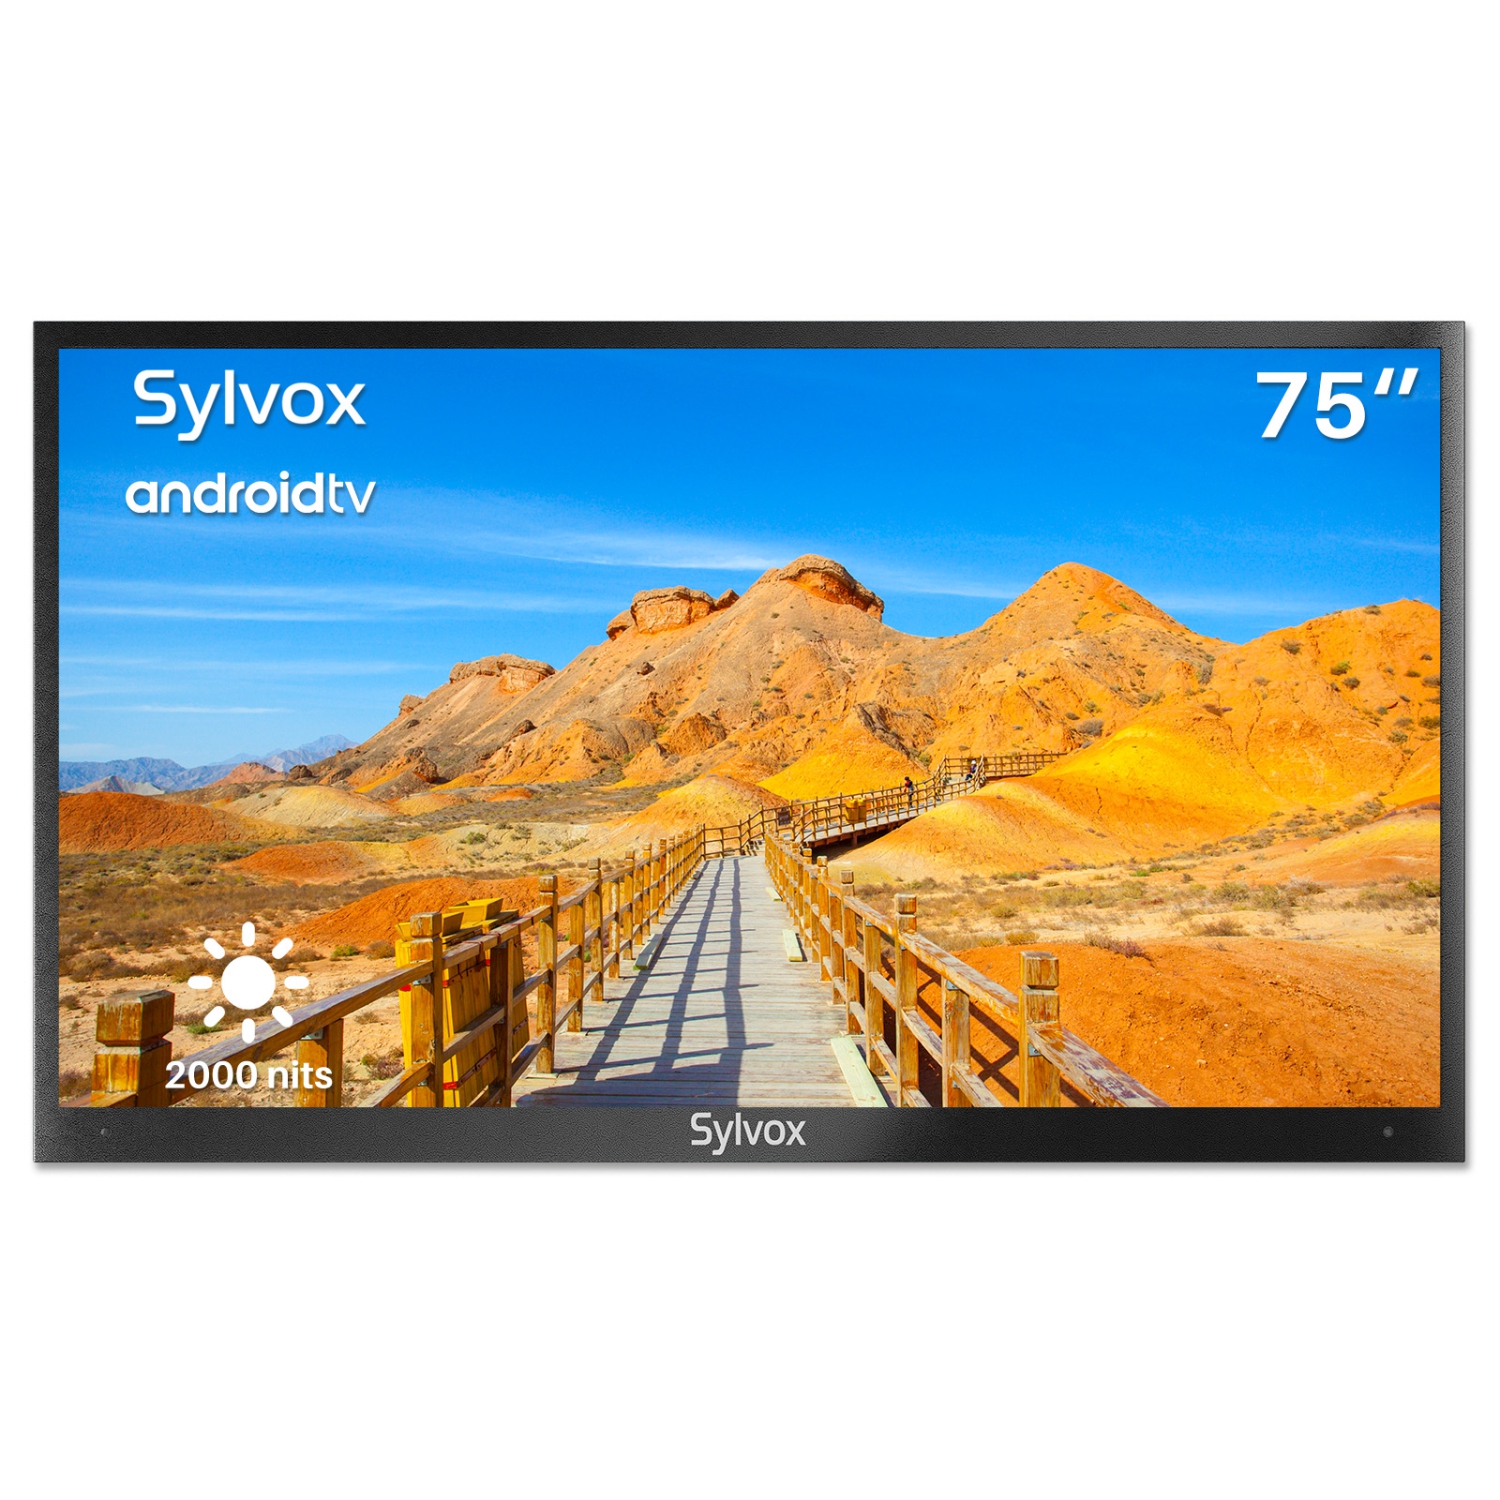 SYLVOX Outdoor TV Pool Pro Series 75 inch Smart Outside TV 2000nits Waterproof Full Sun Outdoor Television,Built-in Google Play Voice Assistant and Chromecast